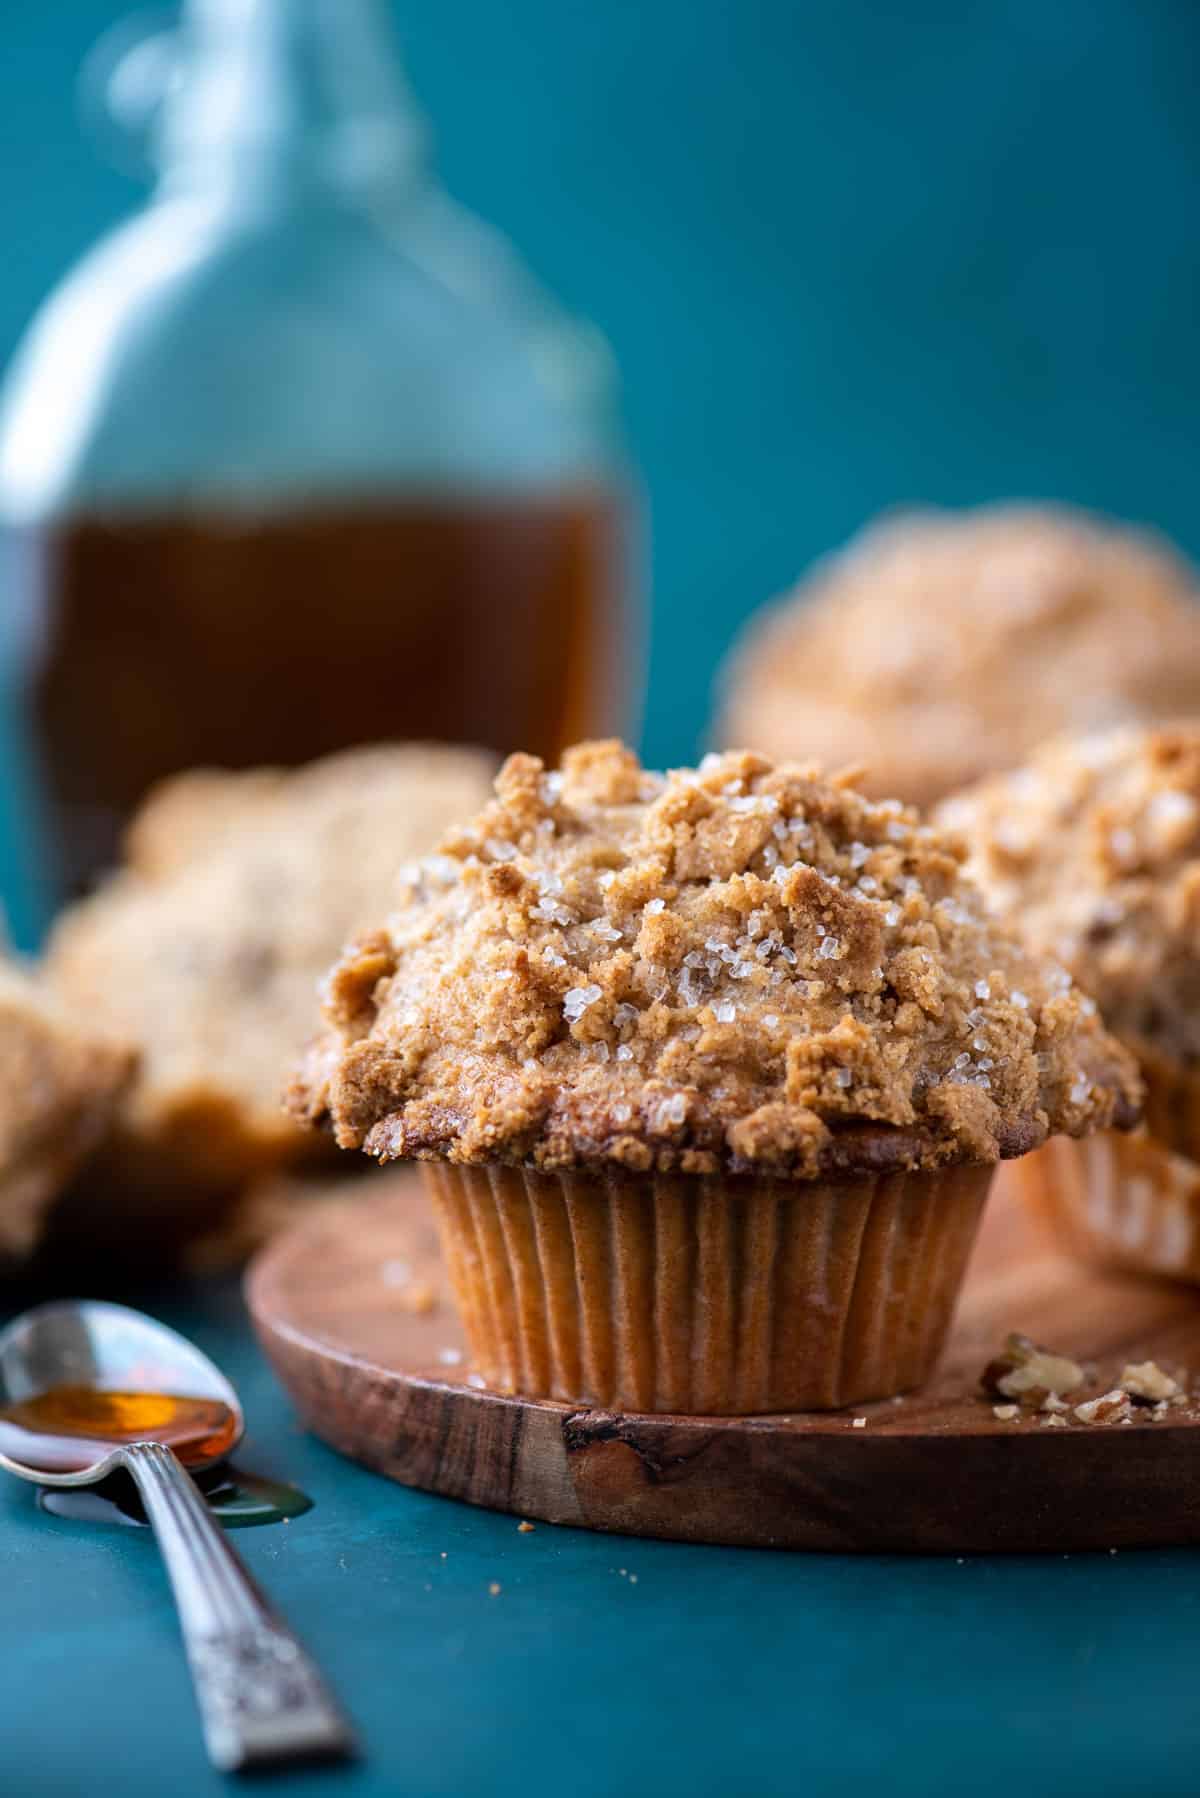 a maple pecan muffin on a wood plate on top of a teal surface with more muffins in the background and a spoon of maple syrup beside it